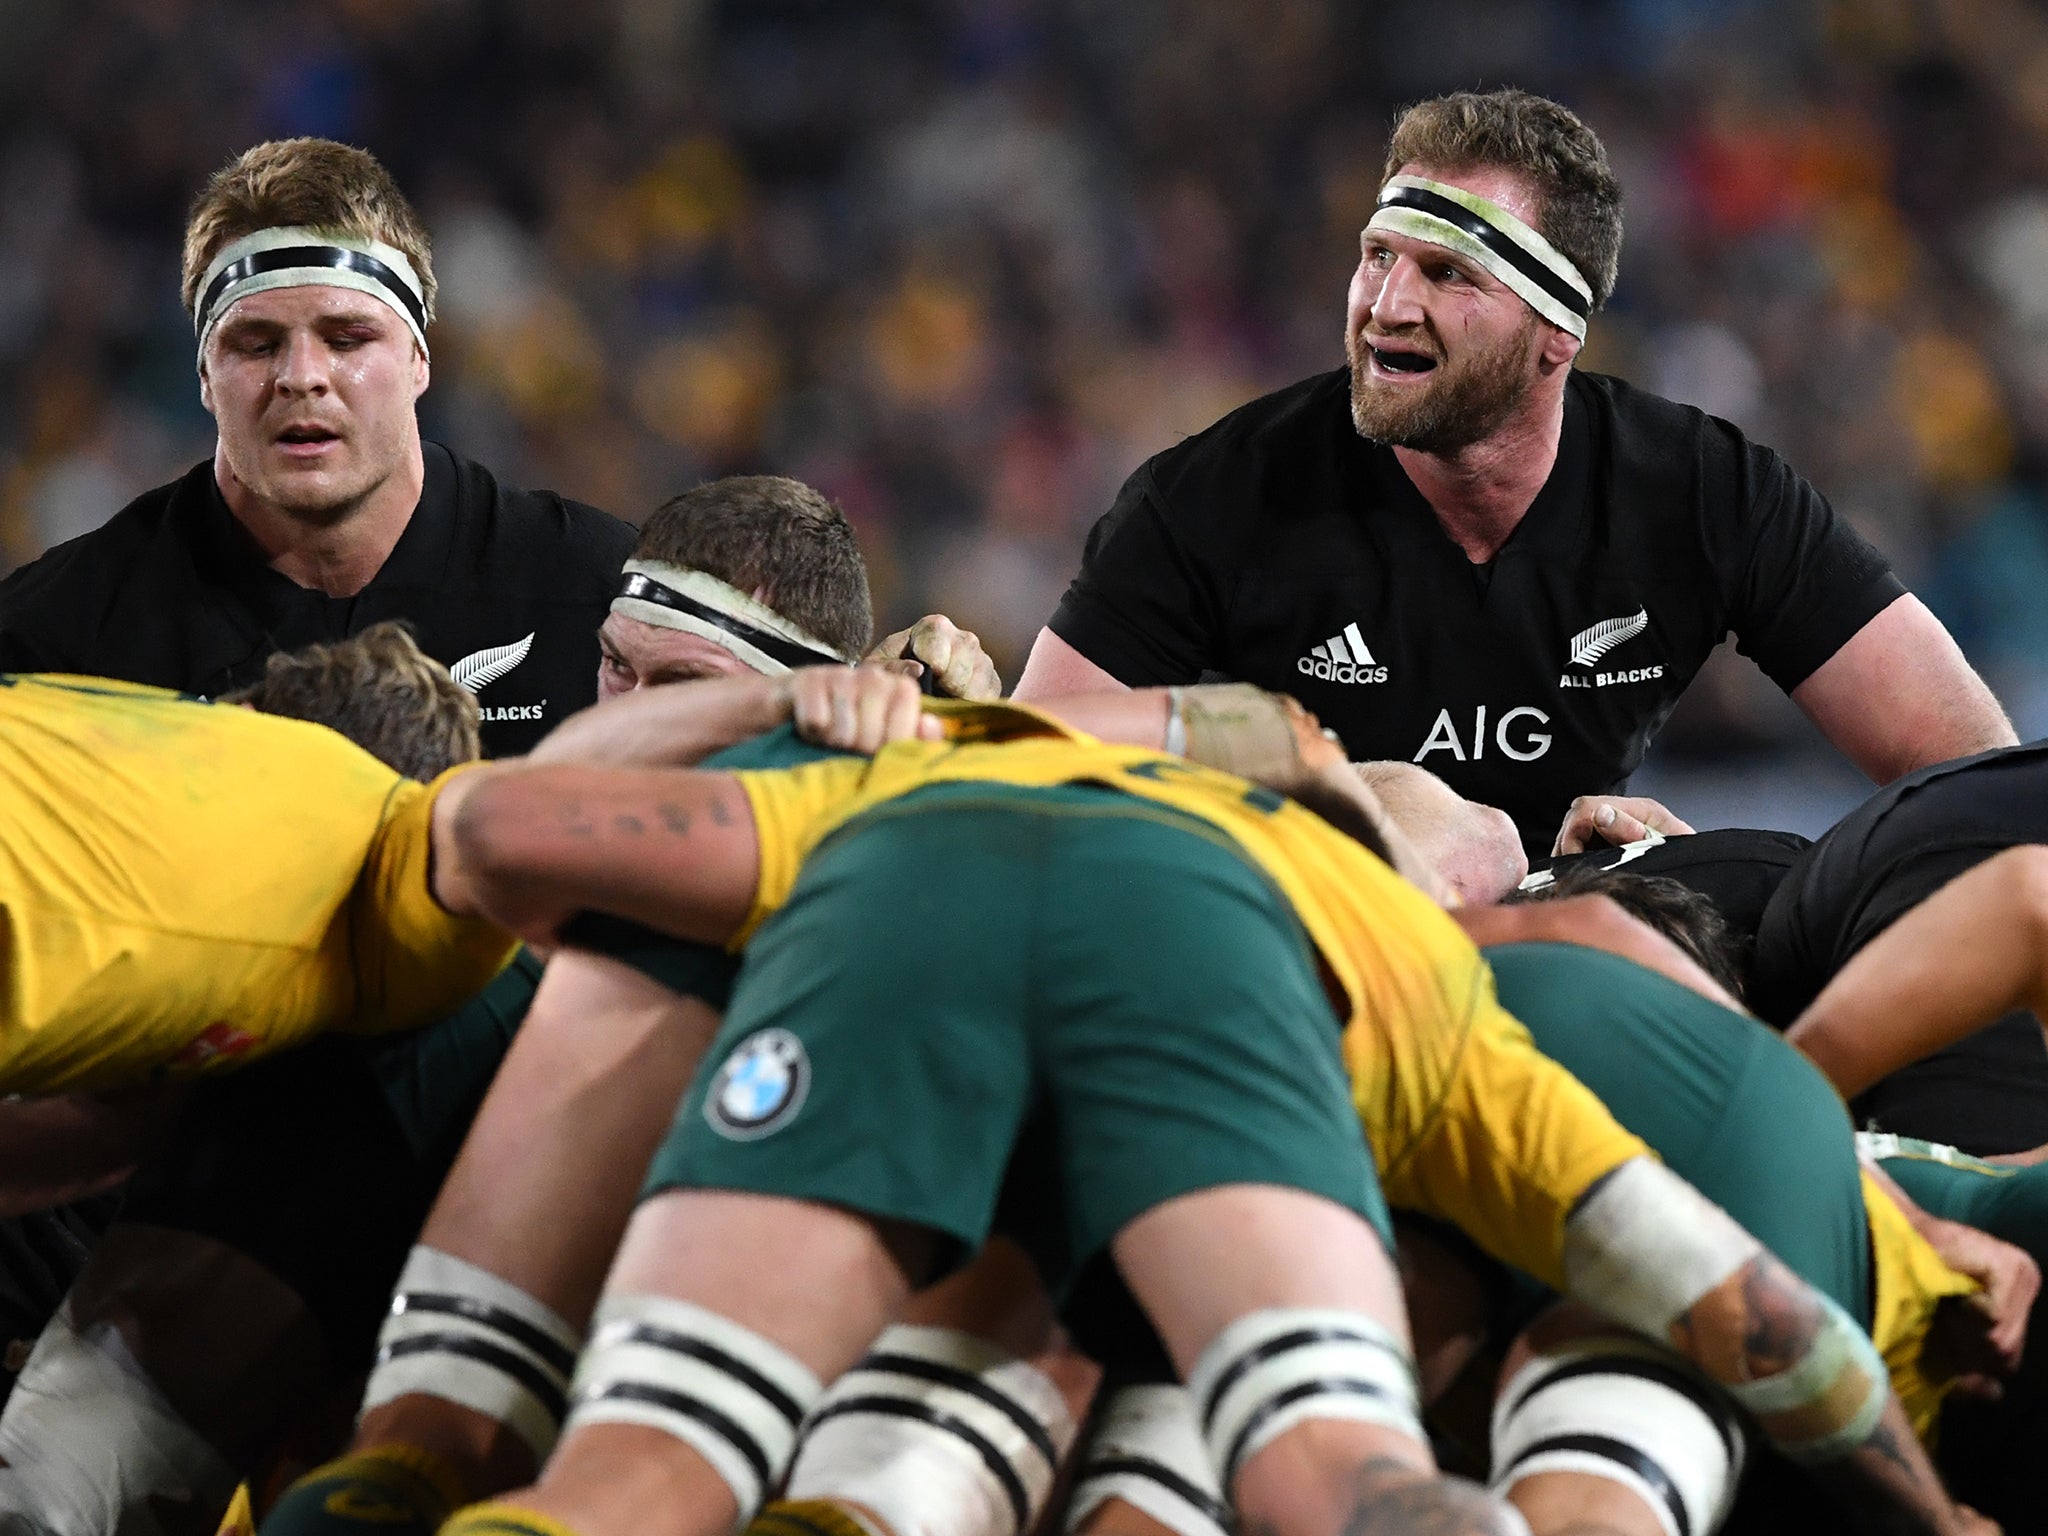 Kieran Read was delighted to pass the 50-point barrier against Australia